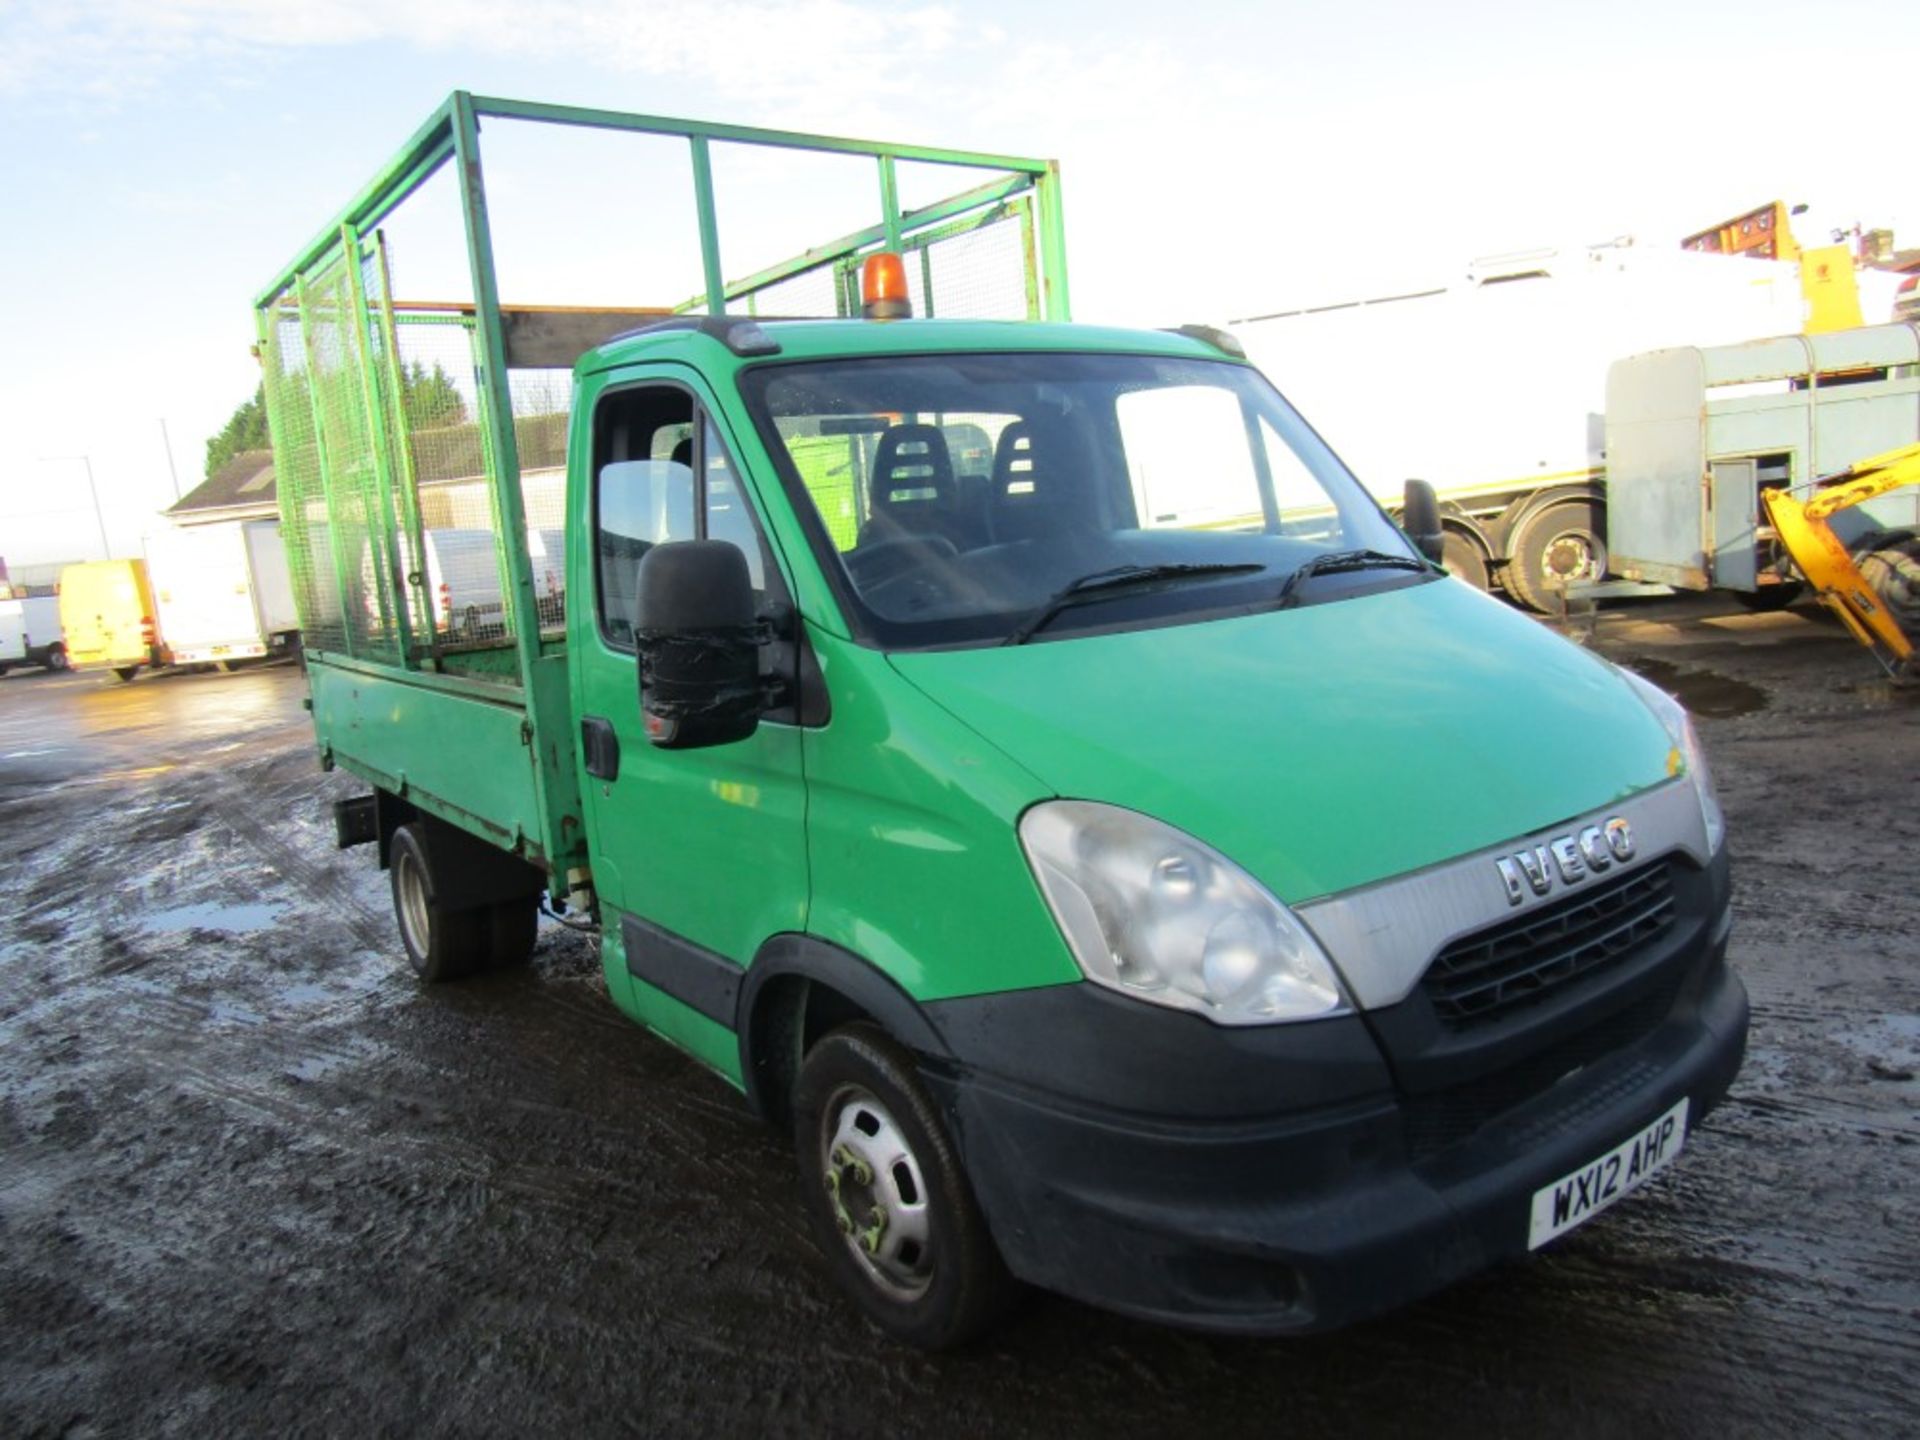 12 reg IVECO DAILY 35C11 MWB TIPPER, 1ST REG 03/12, TEST 06/22, 100762M WARRANTED, V5 HERE, 3 FORMER